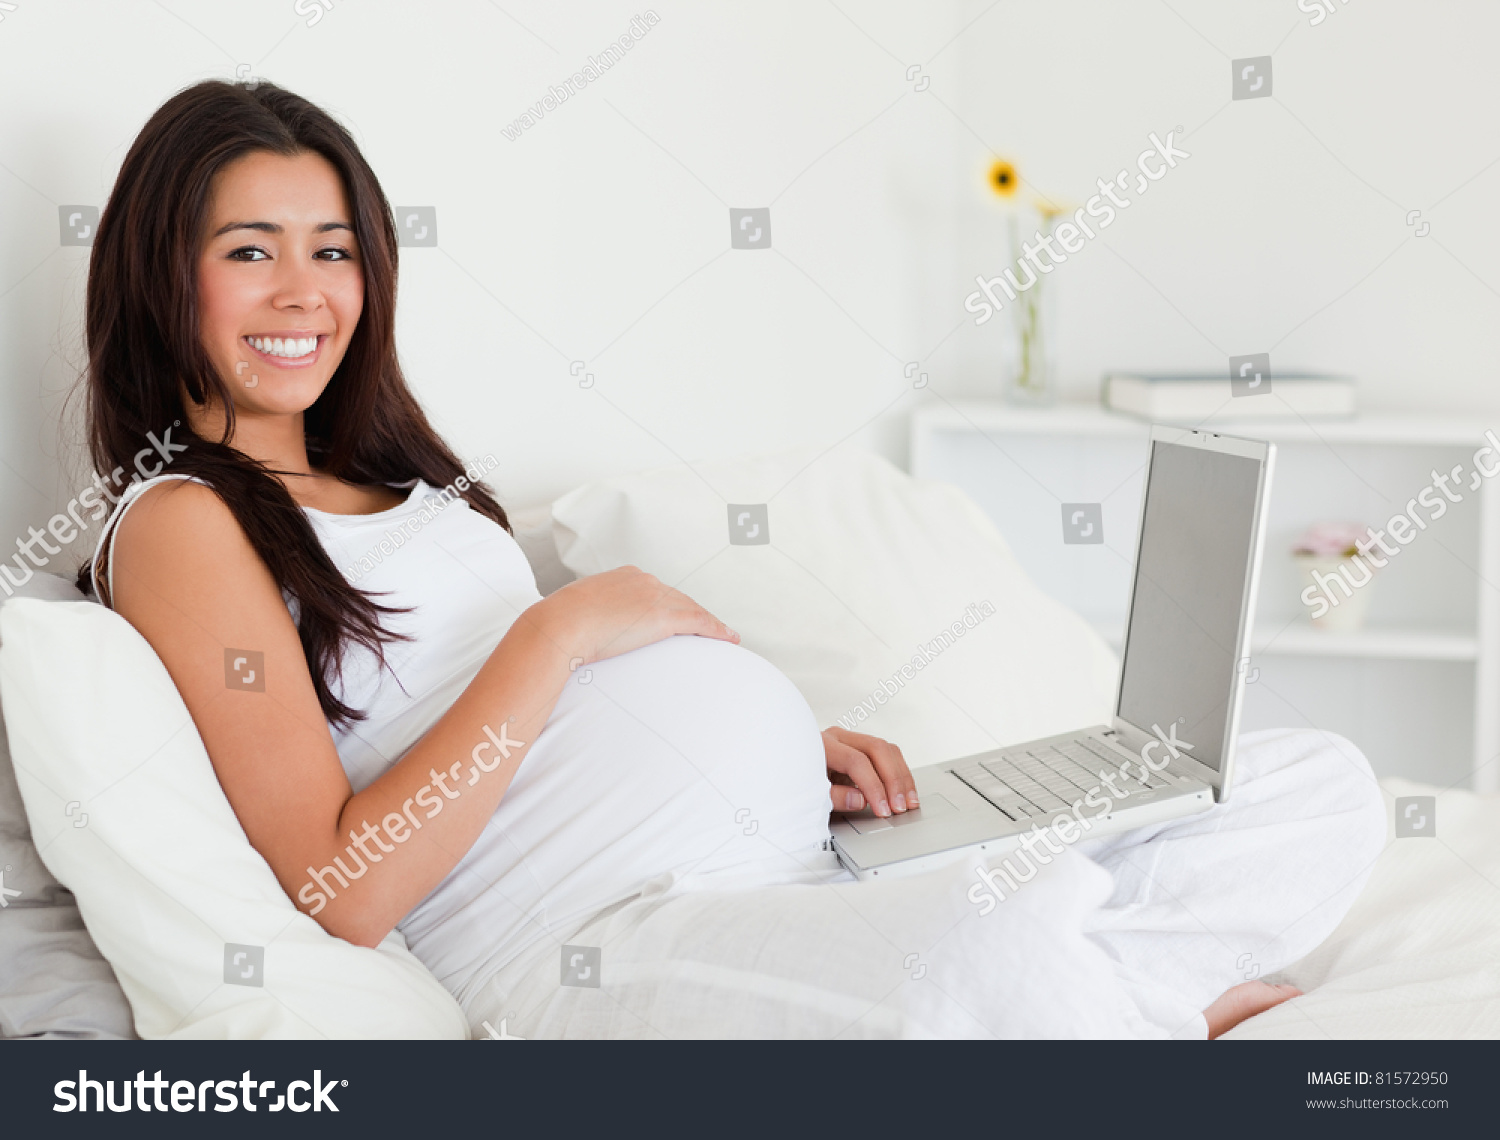 Laptop While Pregnant 21